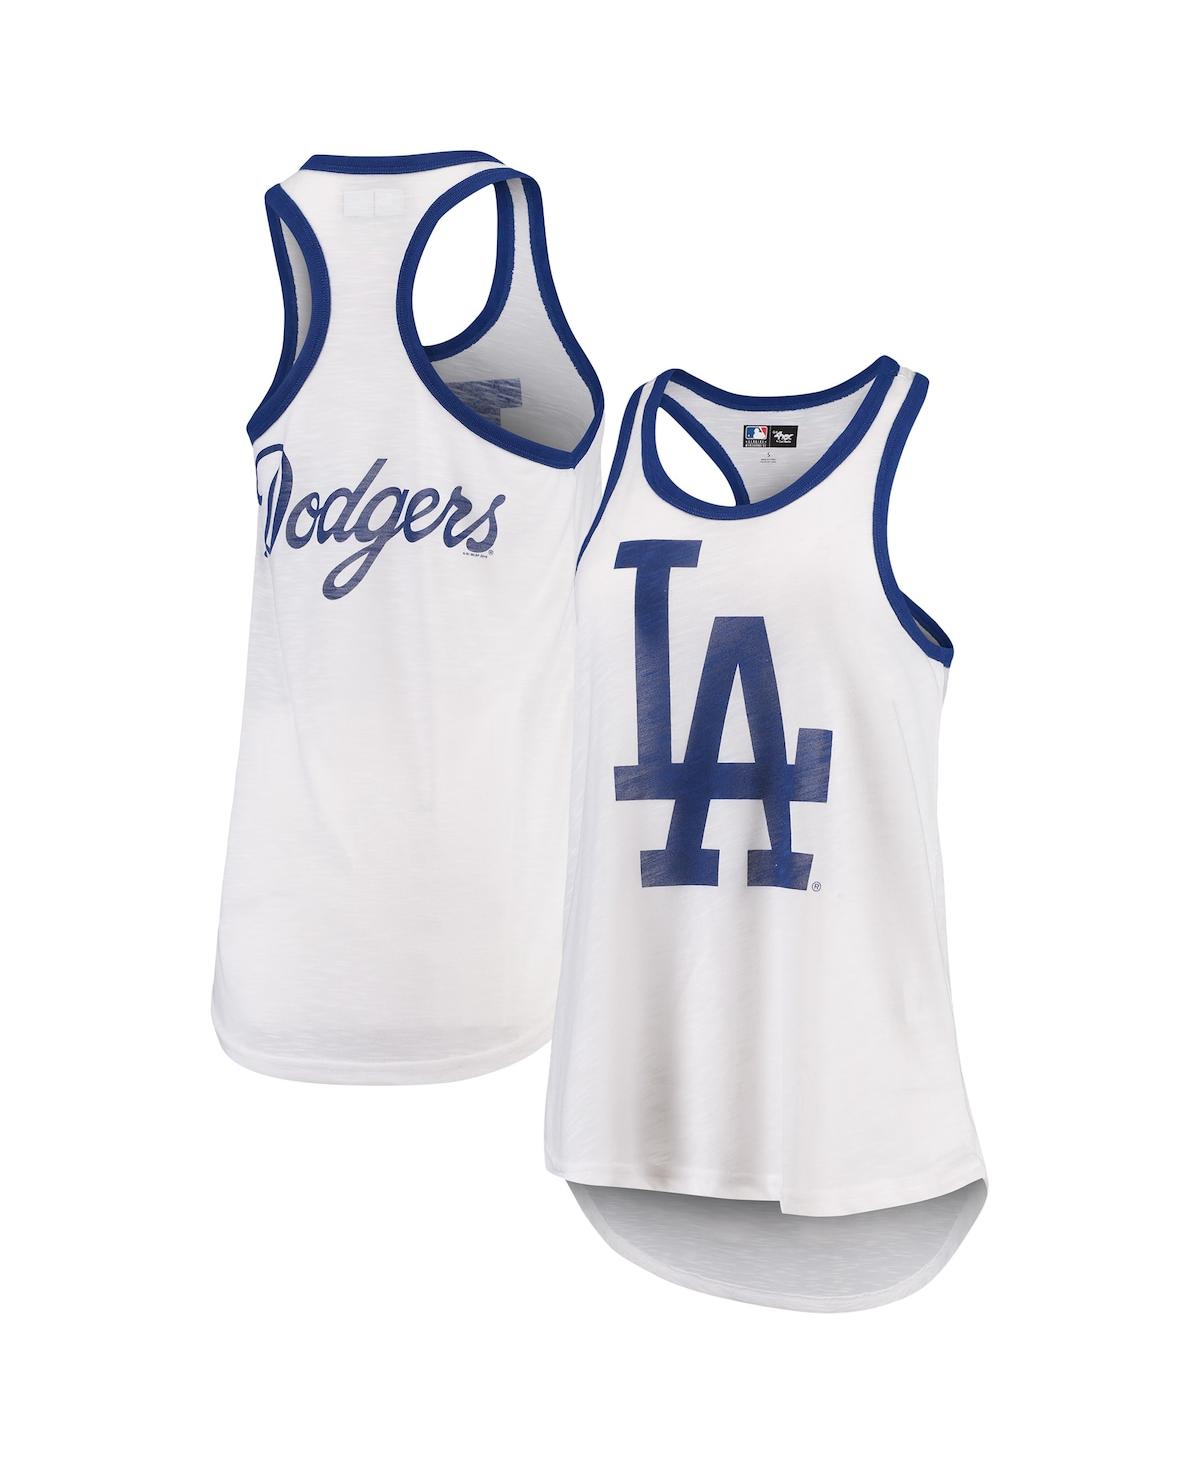 G-iii 4her By Carl Banks Women's  White Los Angeles Dodgers Tater Racerback Tank Top